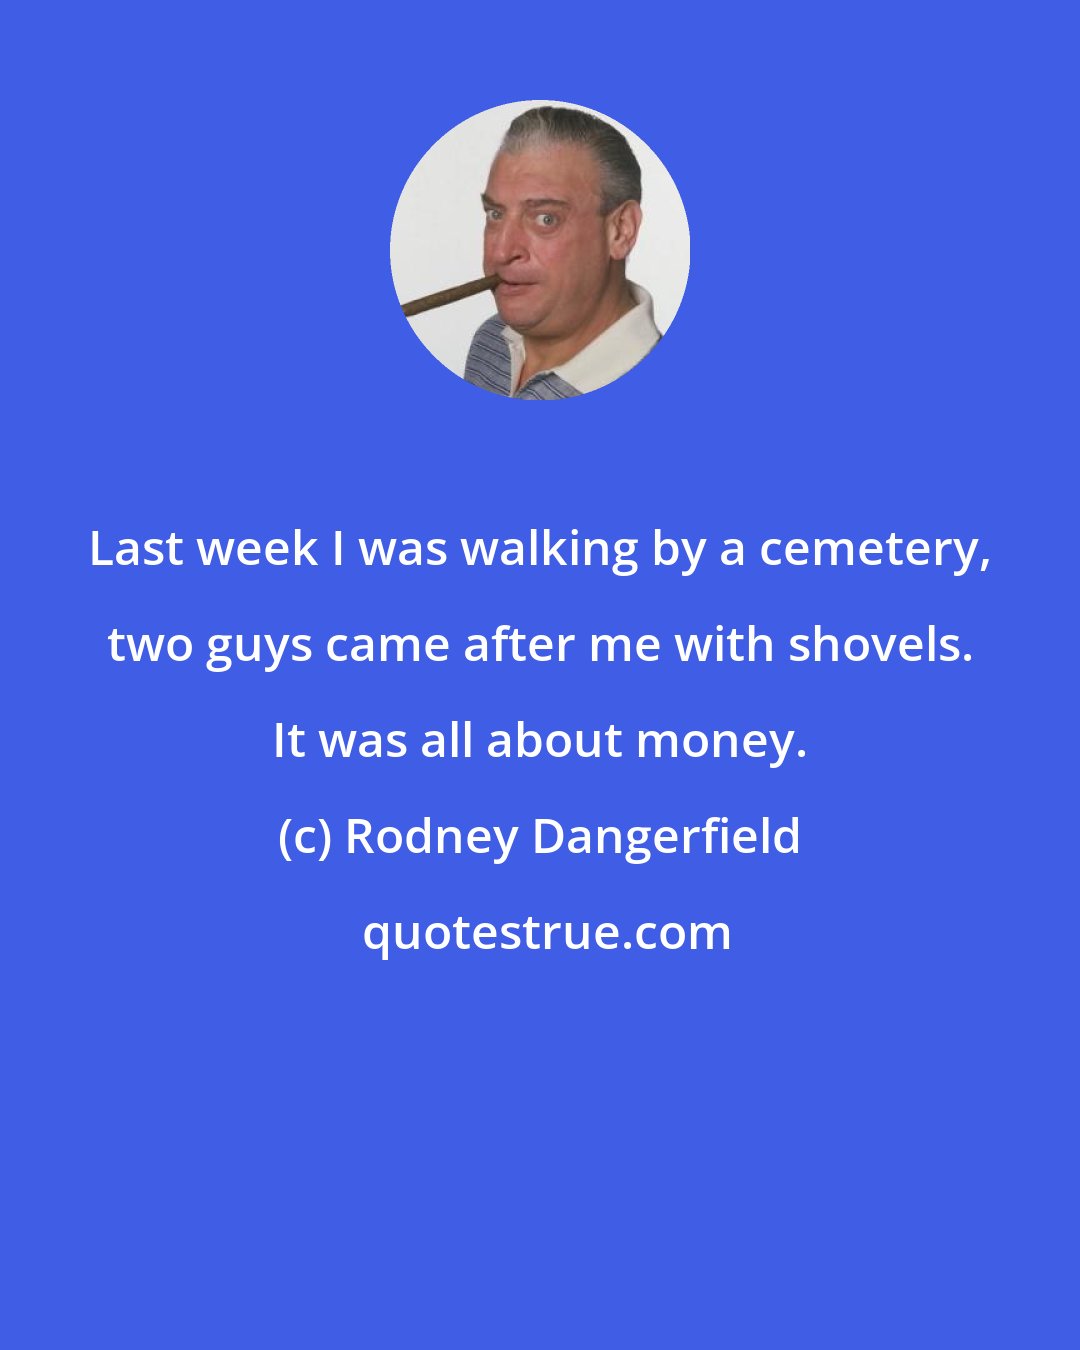 Rodney Dangerfield: Last week I was walking by a cemetery, two guys came after me with shovels. It was all about money.